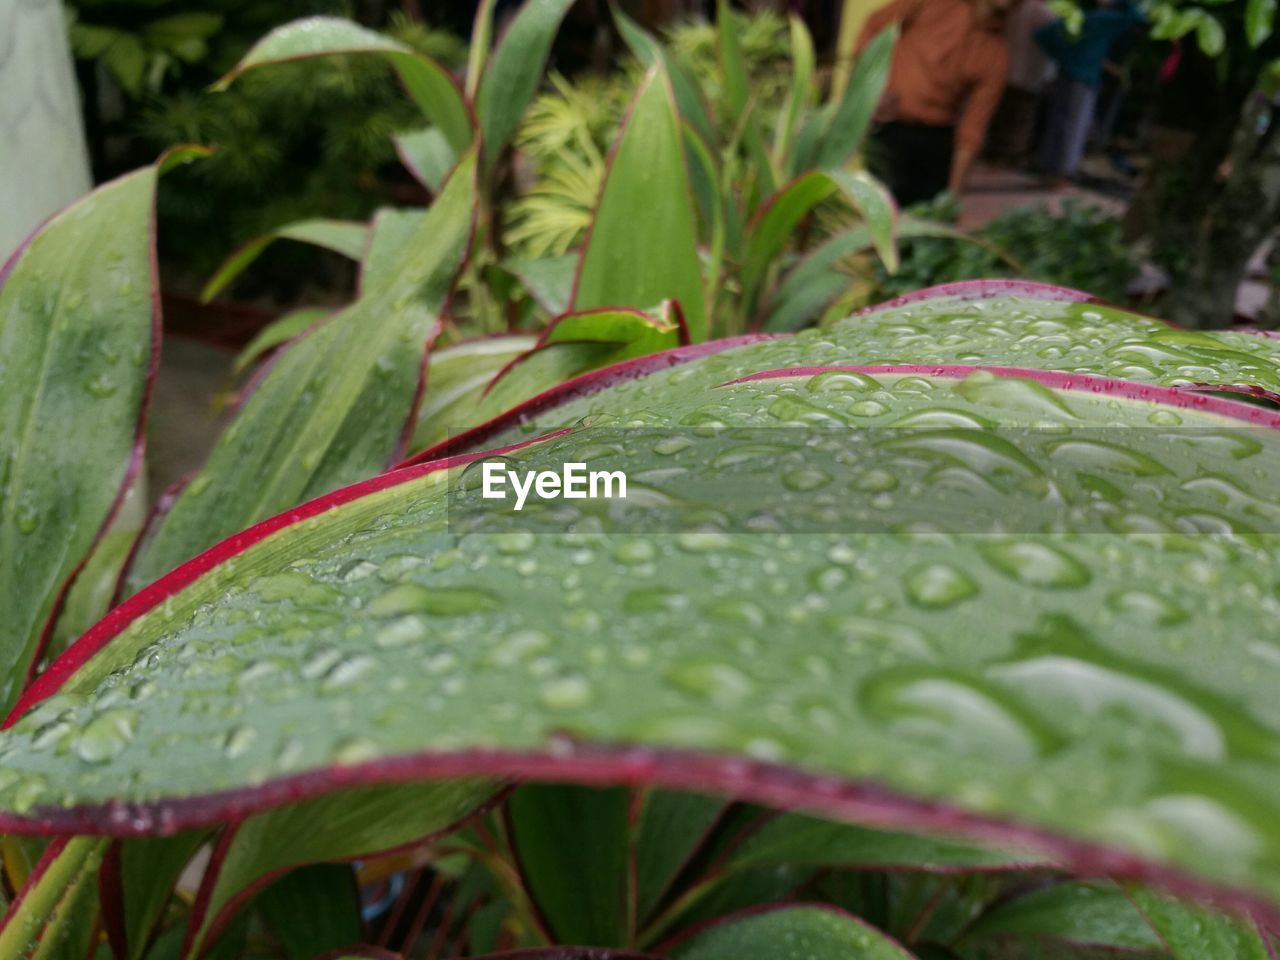 CLOSE-UP OF WET PLANT LEAVES